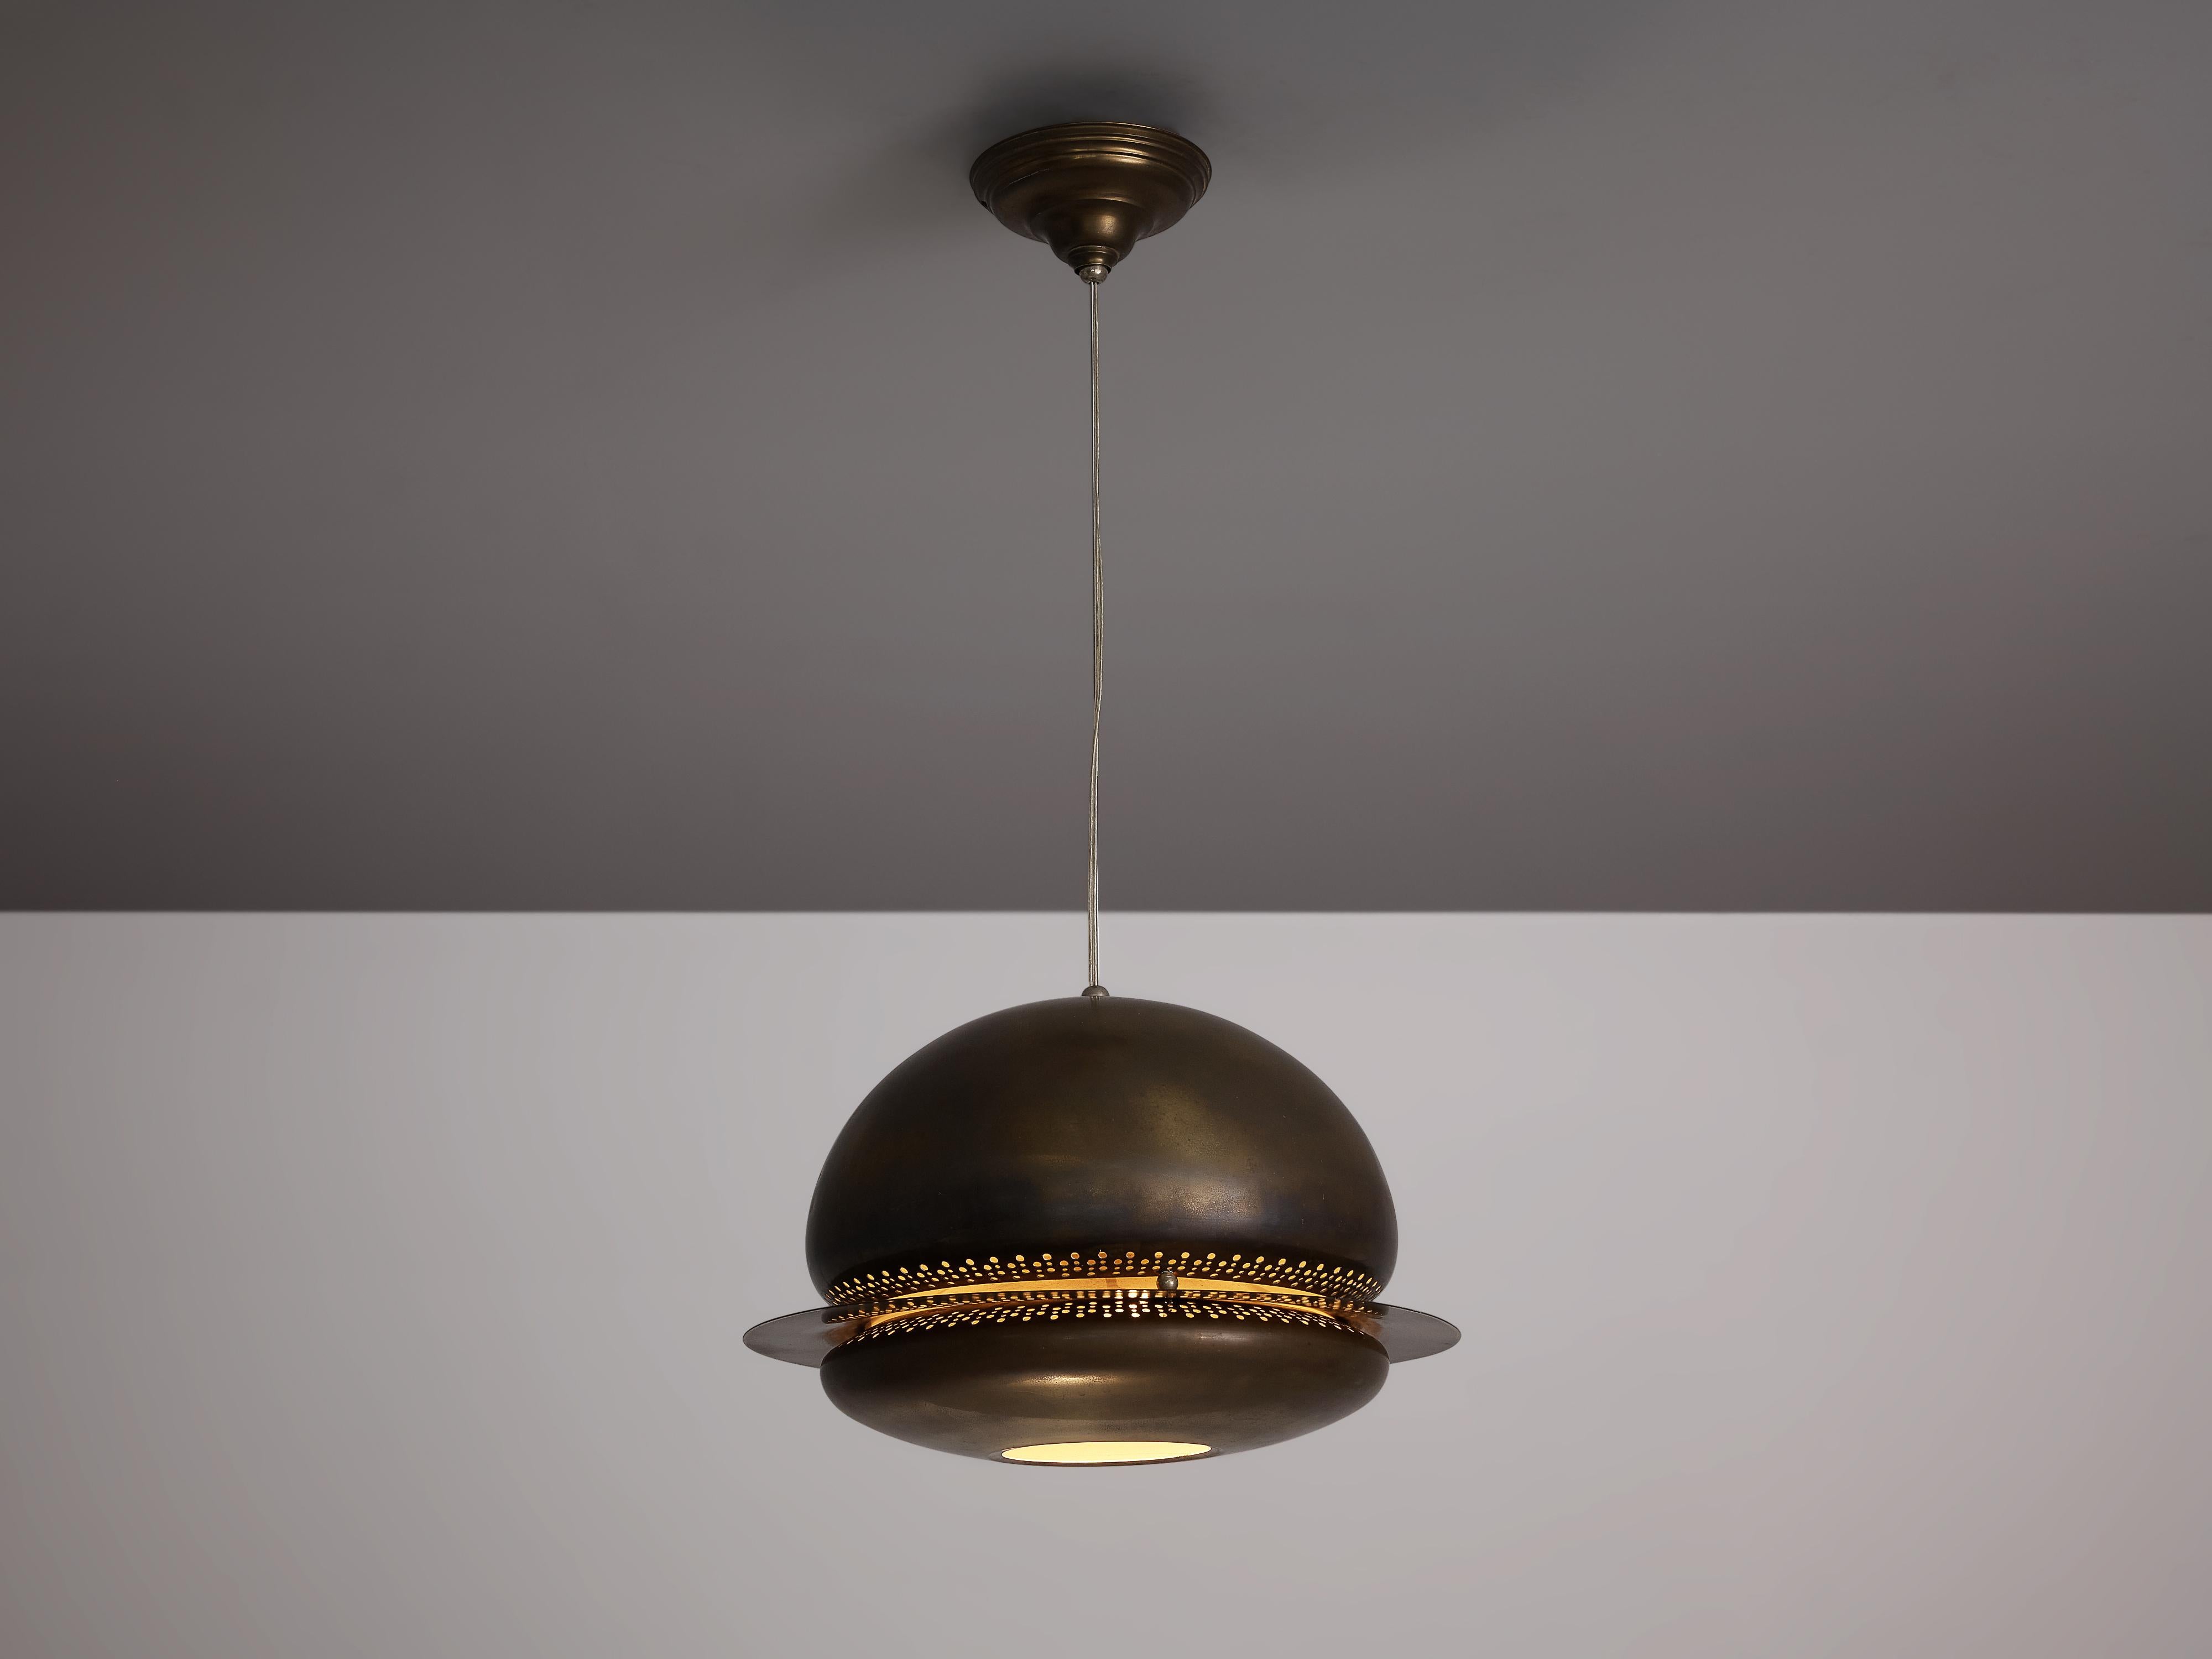 Afra & Tobia Scarpa for FLos, pendant lamp ‘Nictea’, brass, Italy, 1961.

Afra and Tobia Scarpa pendant lamp in patinated brass. The ‘Nictea’ pendant lamp is a beautiful example of the designs that Afra & Tobia Scarpa designed in the 1960s. It shows